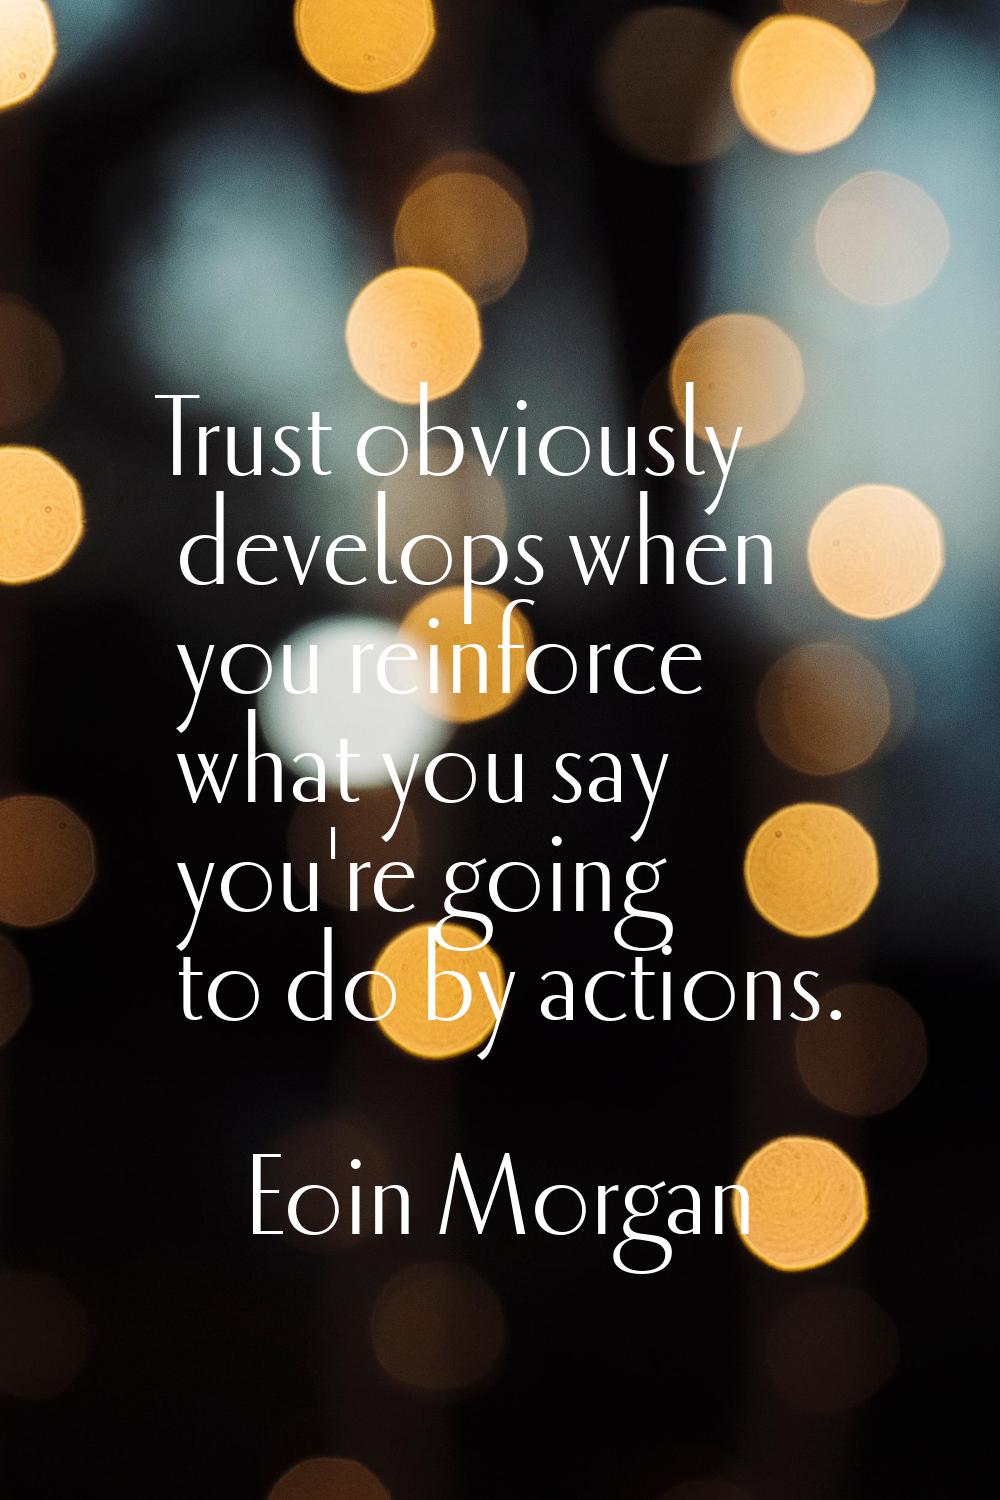 Trust obviously develops when you reinforce what you say you're going to do by actions.